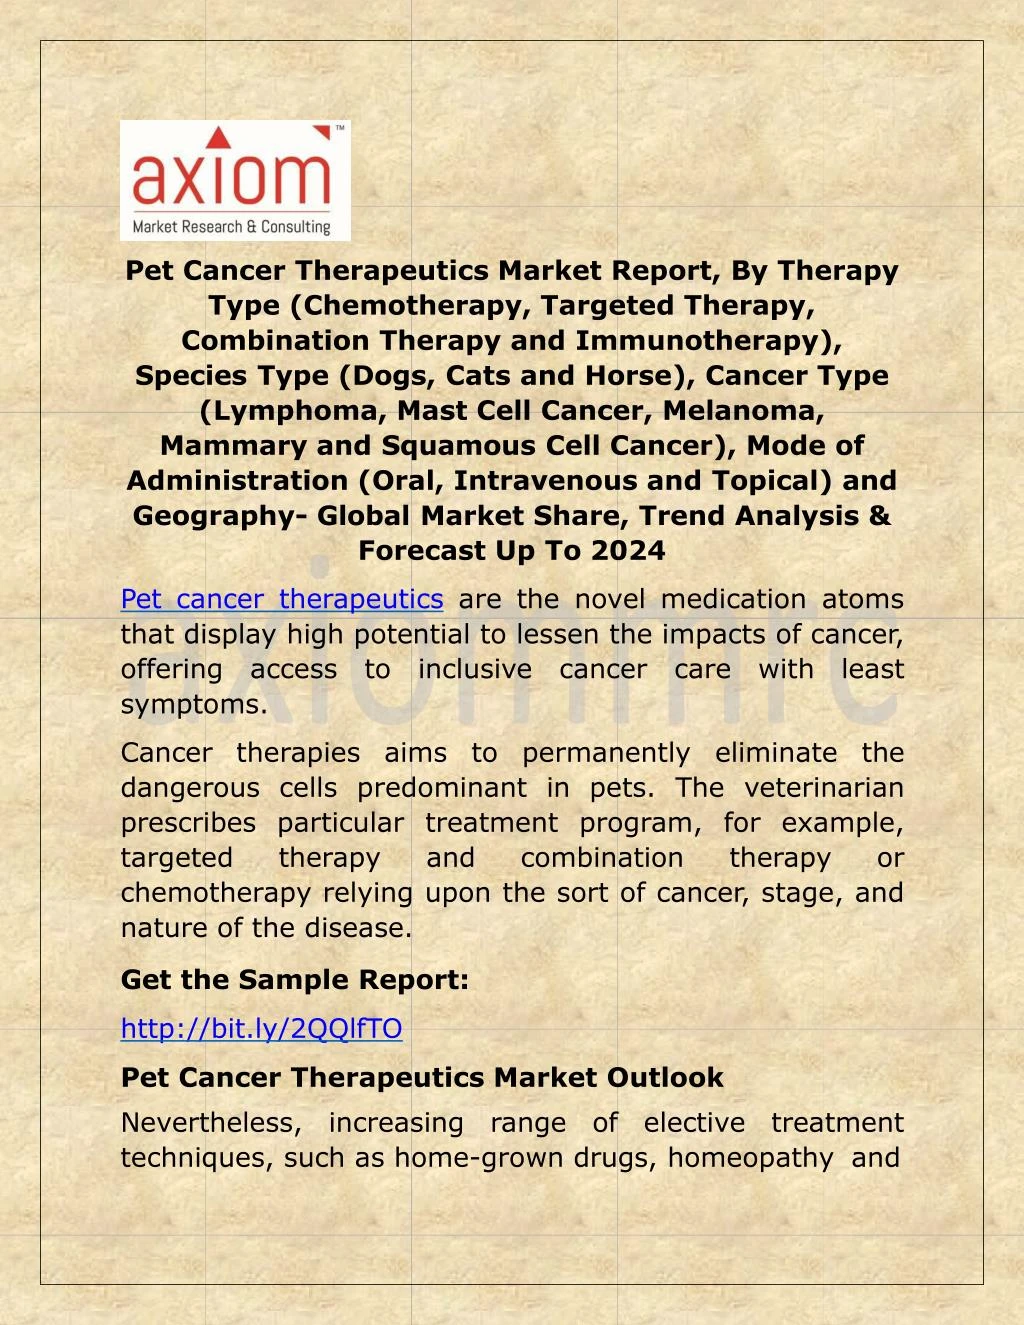 pet cancer therapeutics market report by therapy